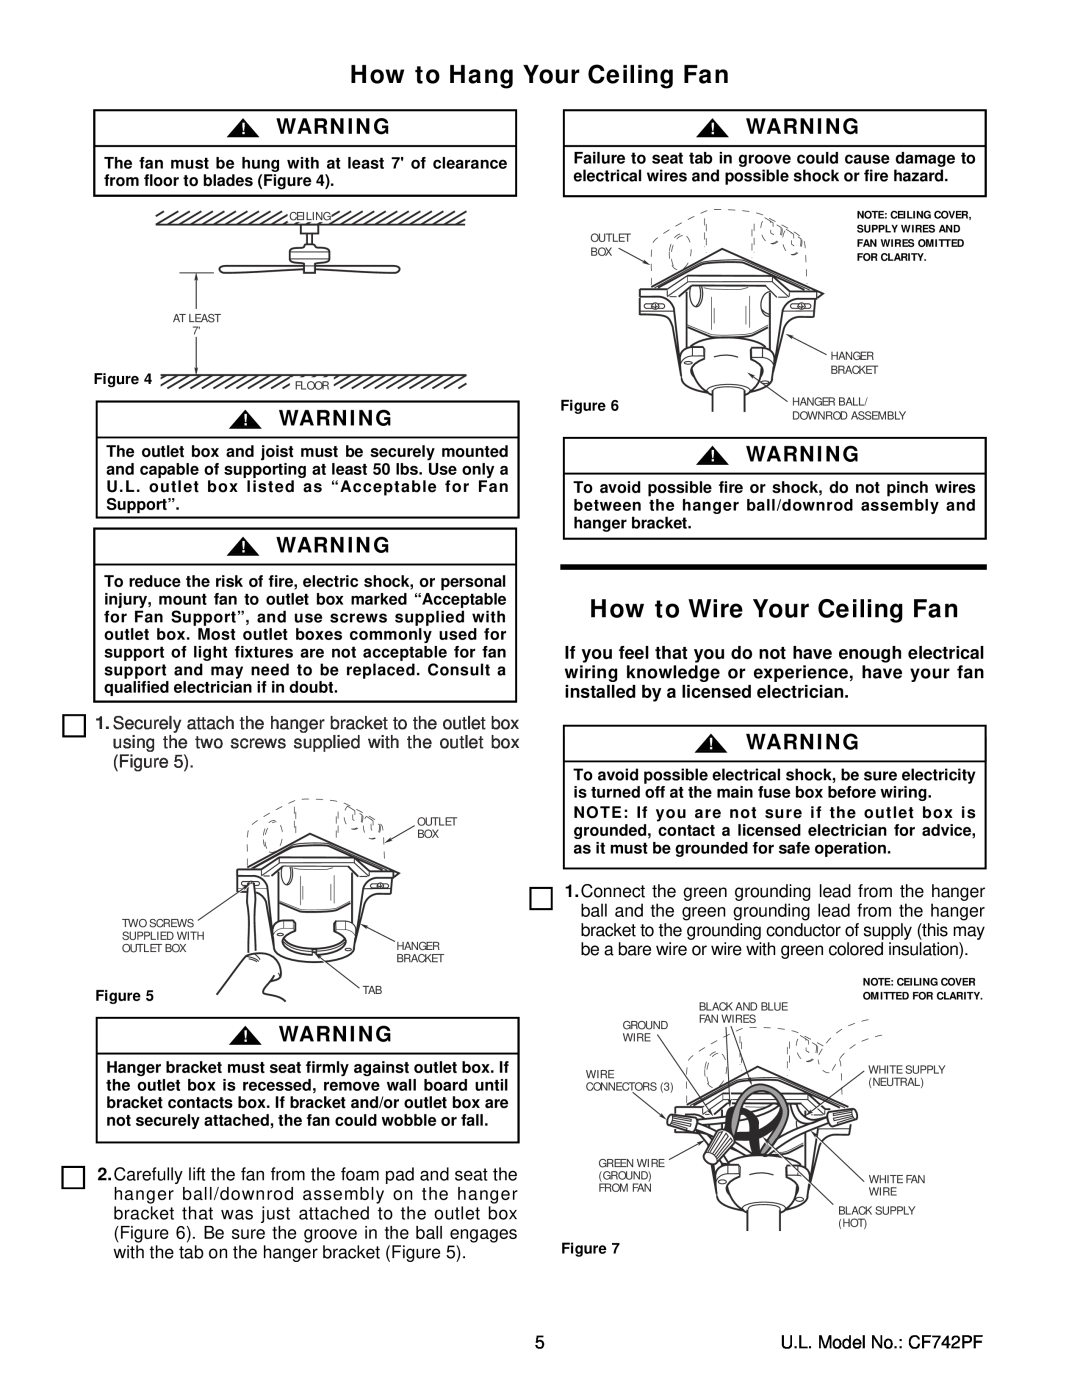 Emerson CF742PFWW 01, CF742PFSCB 01 warranty How to Hang Your Ceiling Fan, How to Wire Your Ceiling Fan 